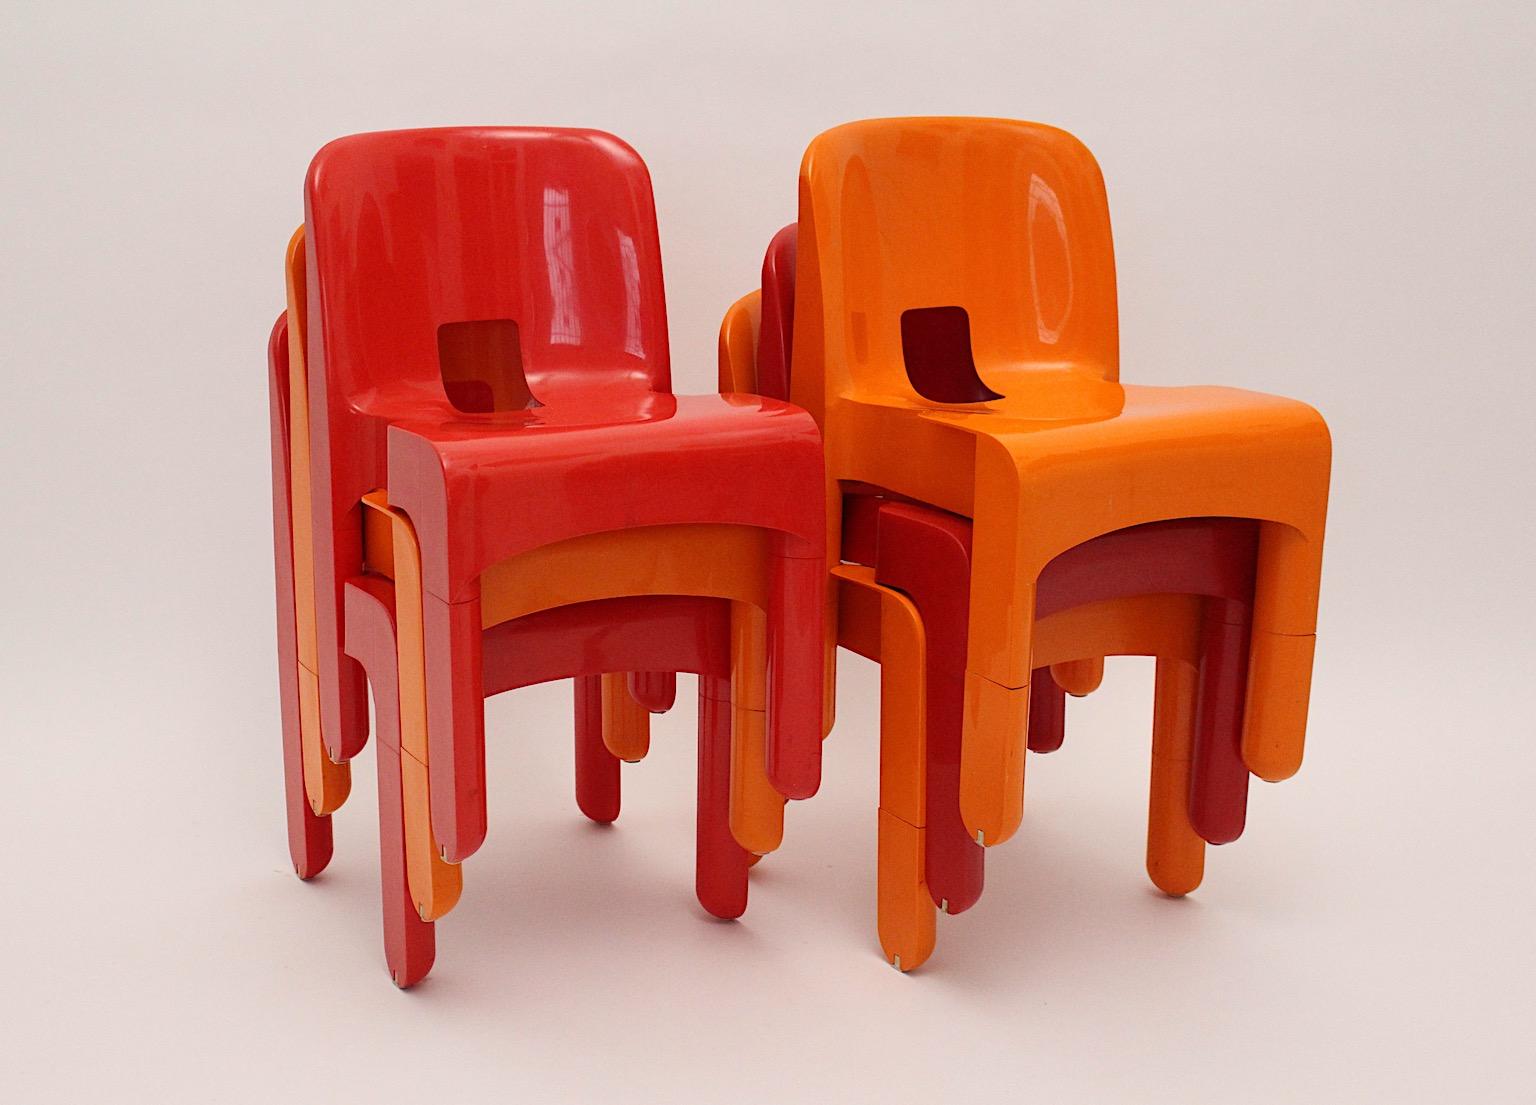 Italian Space Age Pop Art Vintage Red Orange Plastic Dining Chairs Joe Colombo Italy Six For Sale